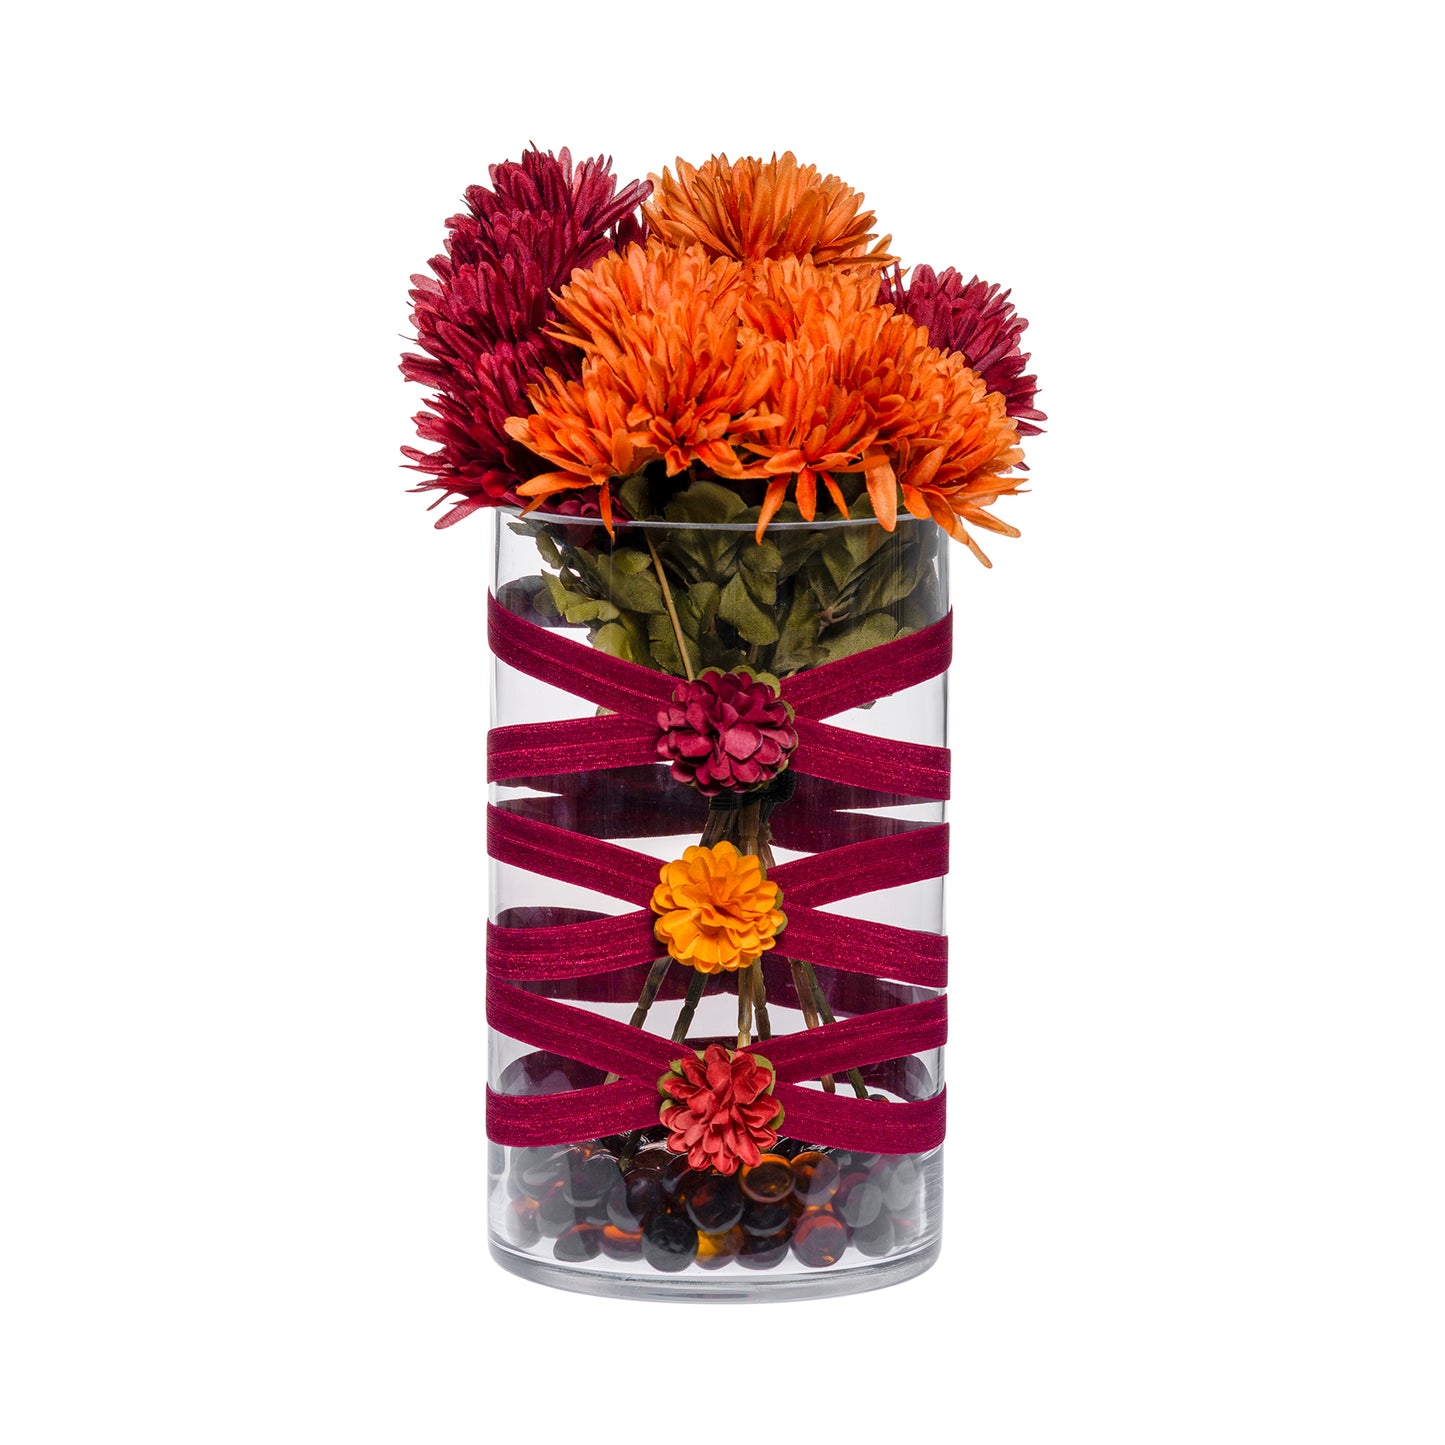 6" x 10" Cylinder Maroon 5X 6 Gold Rust Mums Autumn Fall-O-Ween Collection Complete Set